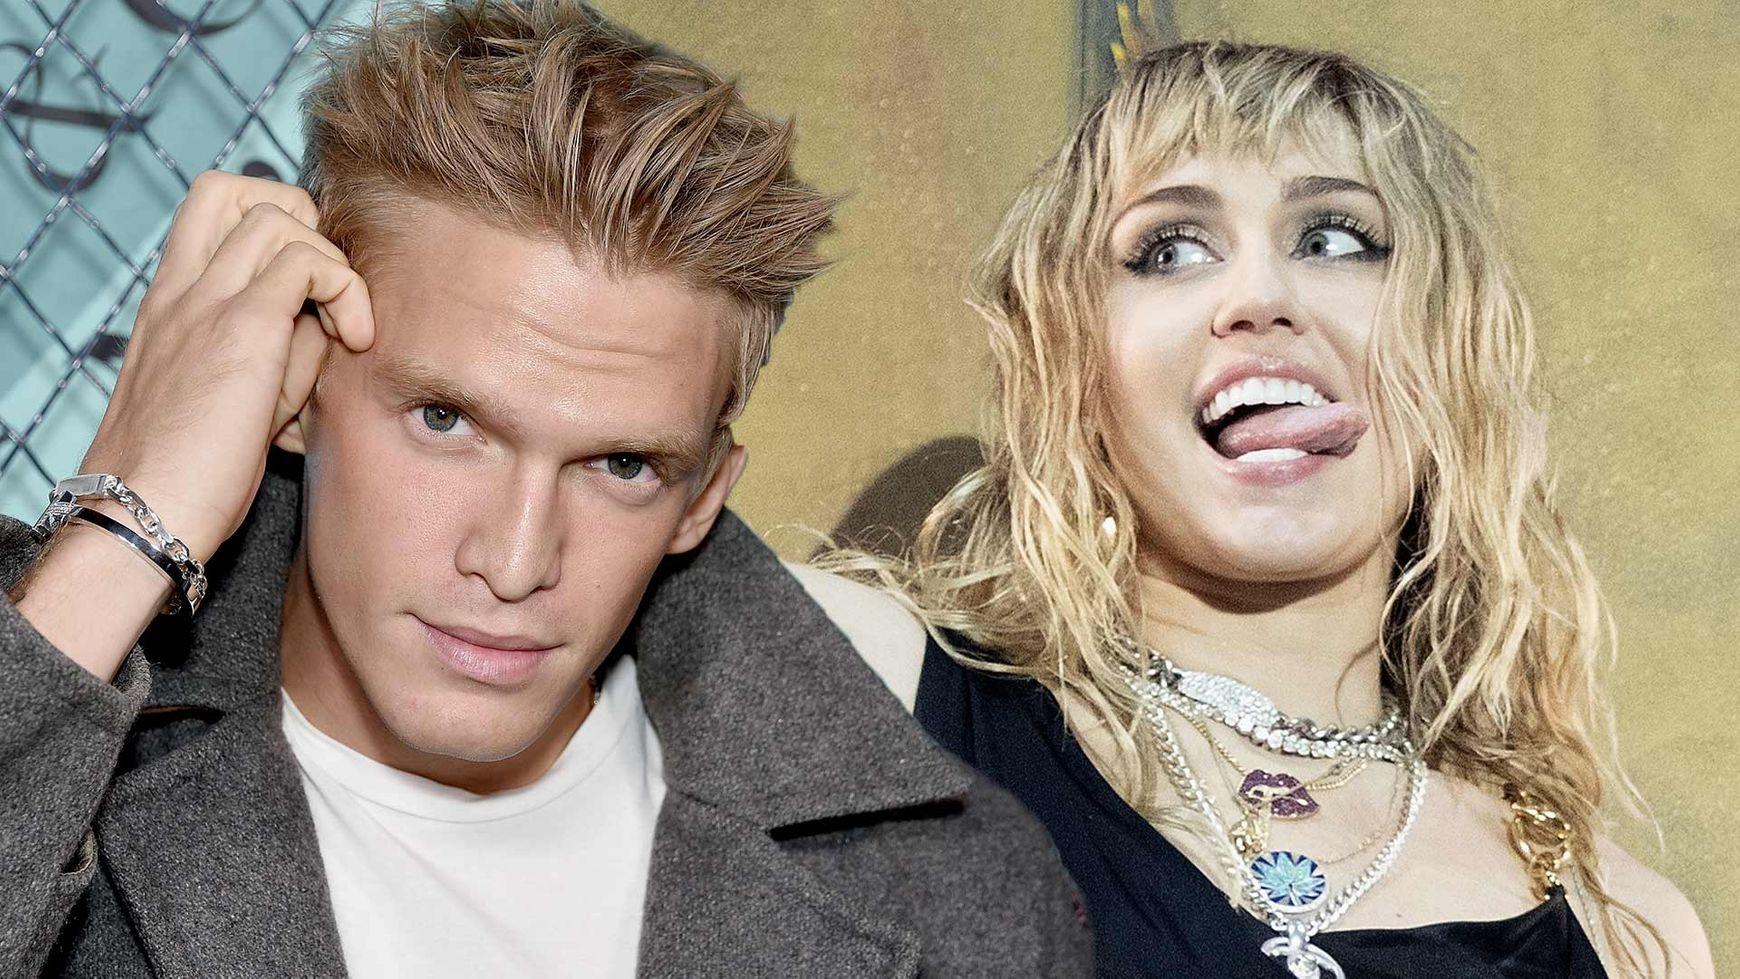 Miley Cyrus Poses Braless With Cody Simpson After Gifting Him Vintage Birthday Present